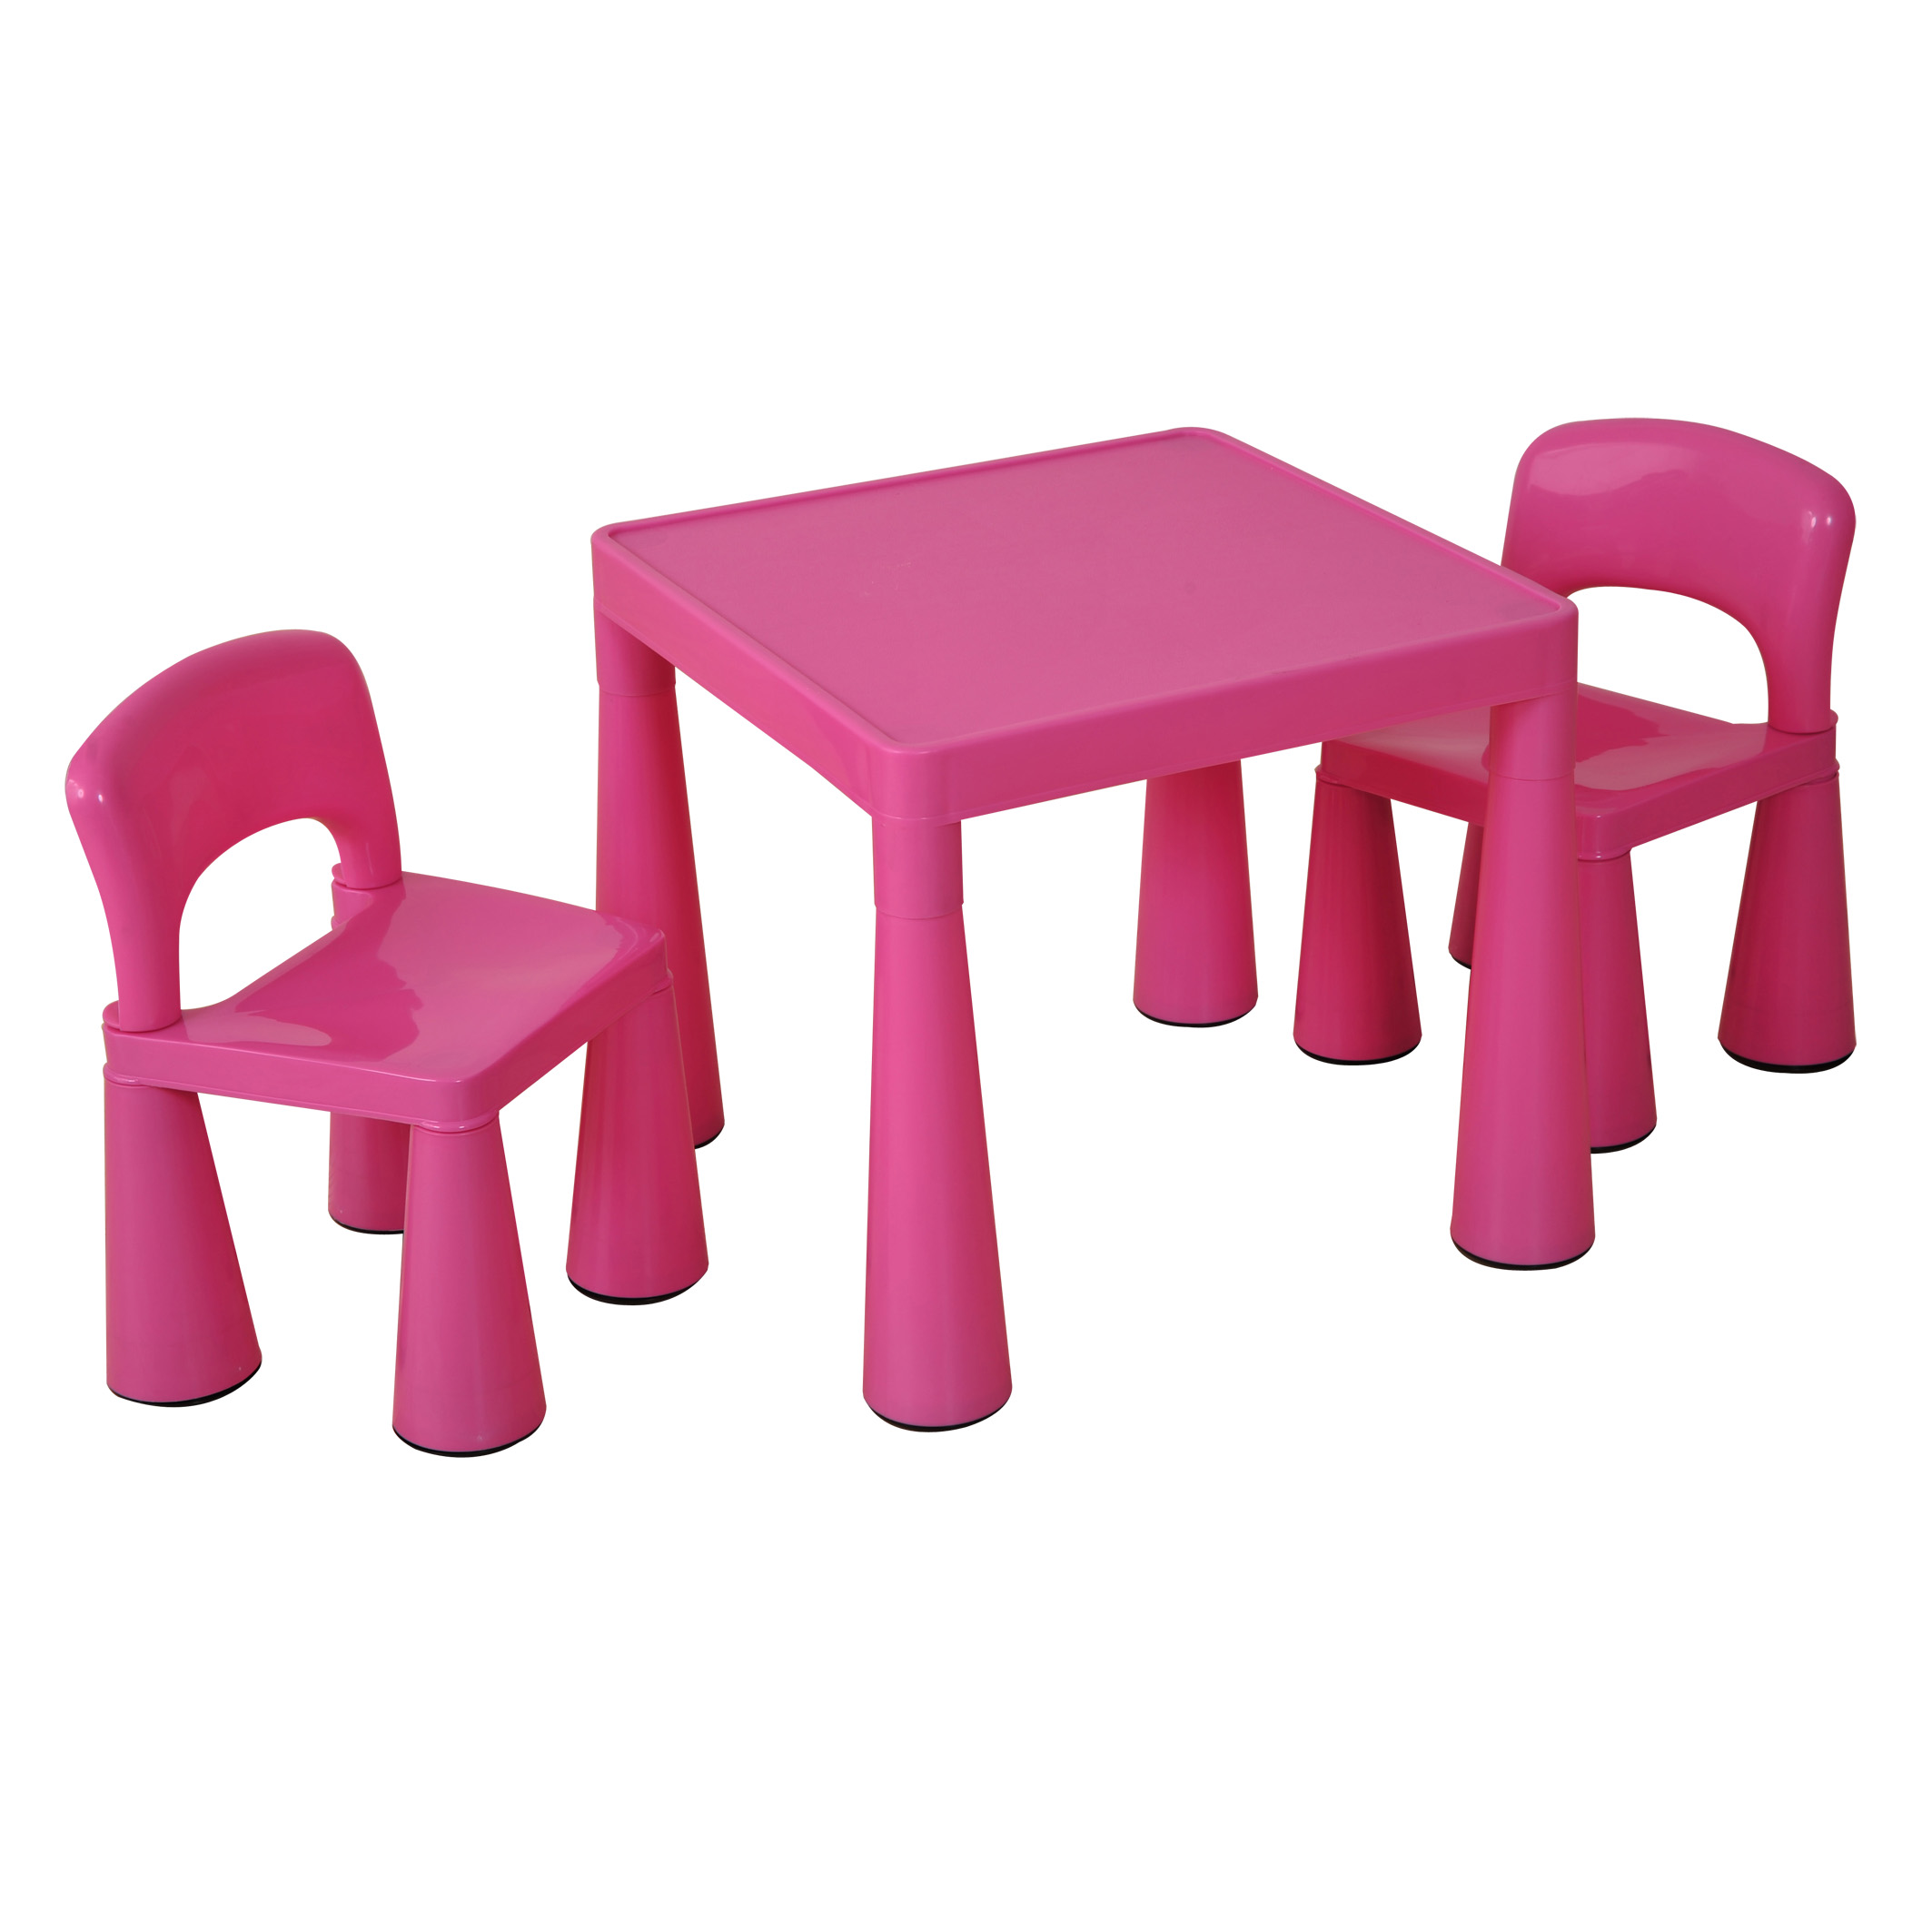 children's table  chair sets ikea cheaper than retail price